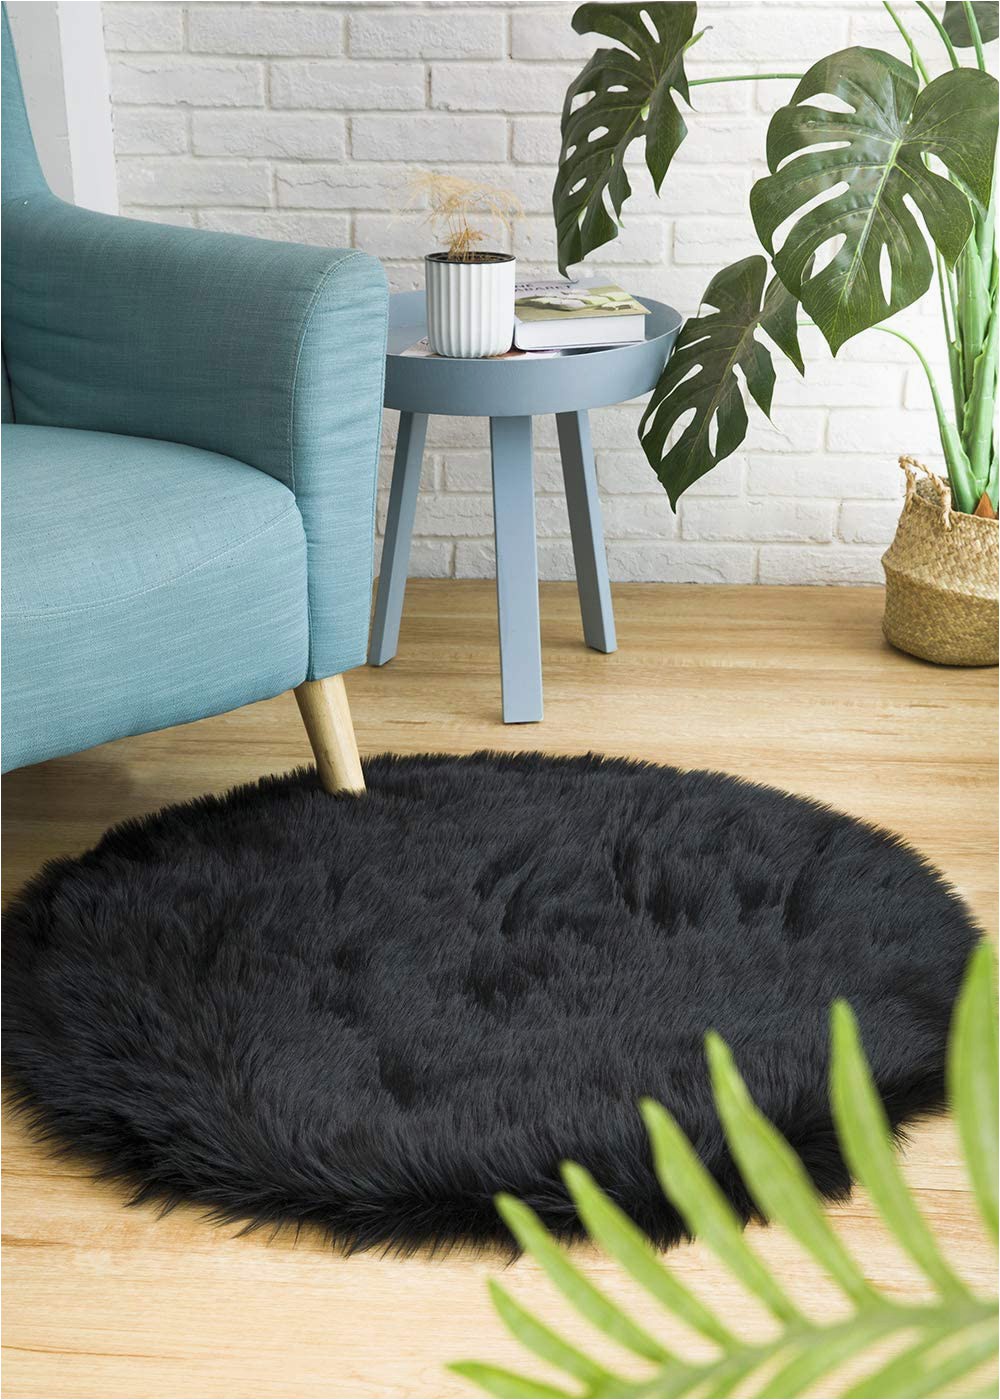 Black Faux Fur area Rug Ciicool soft Faux Sheepskin Fur area Rugs Fluffy Rugs for Bedroom Silky Fuzzy Carpet Furry Rug for Living Room Girls Rooms Black Round 3 X 3 Feet